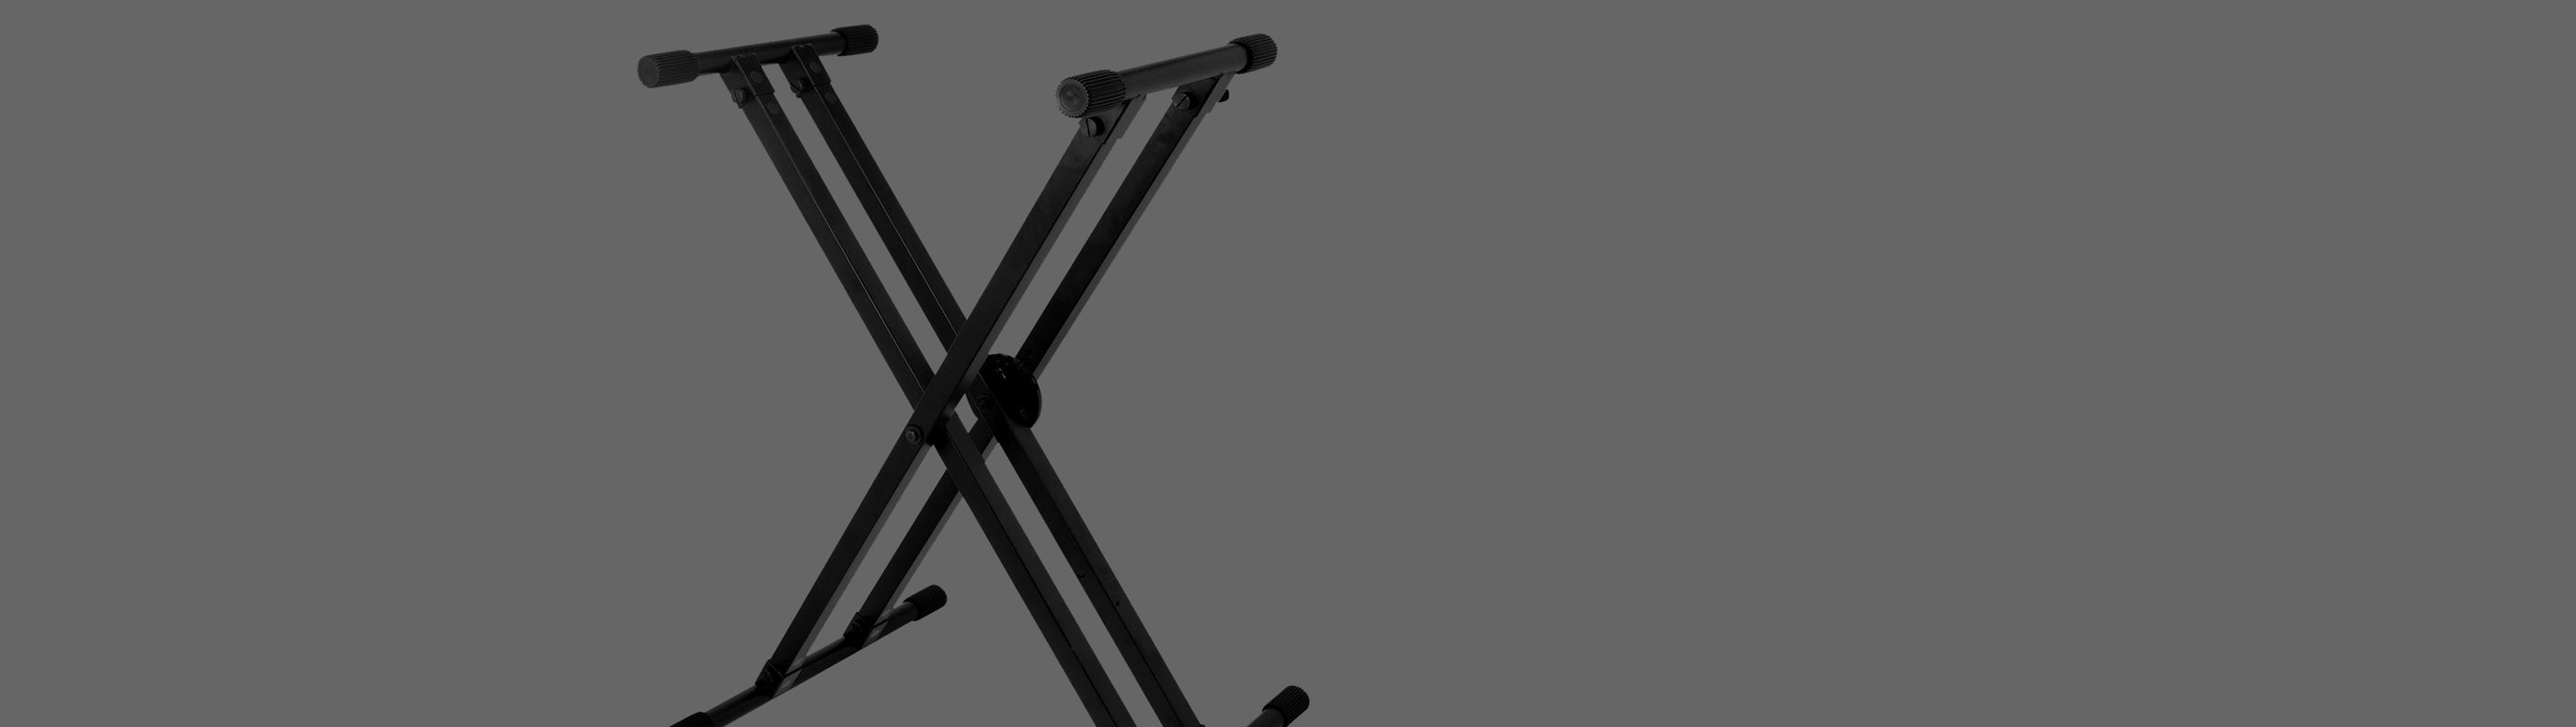 On-Stage Keyboard Stands & Accessories